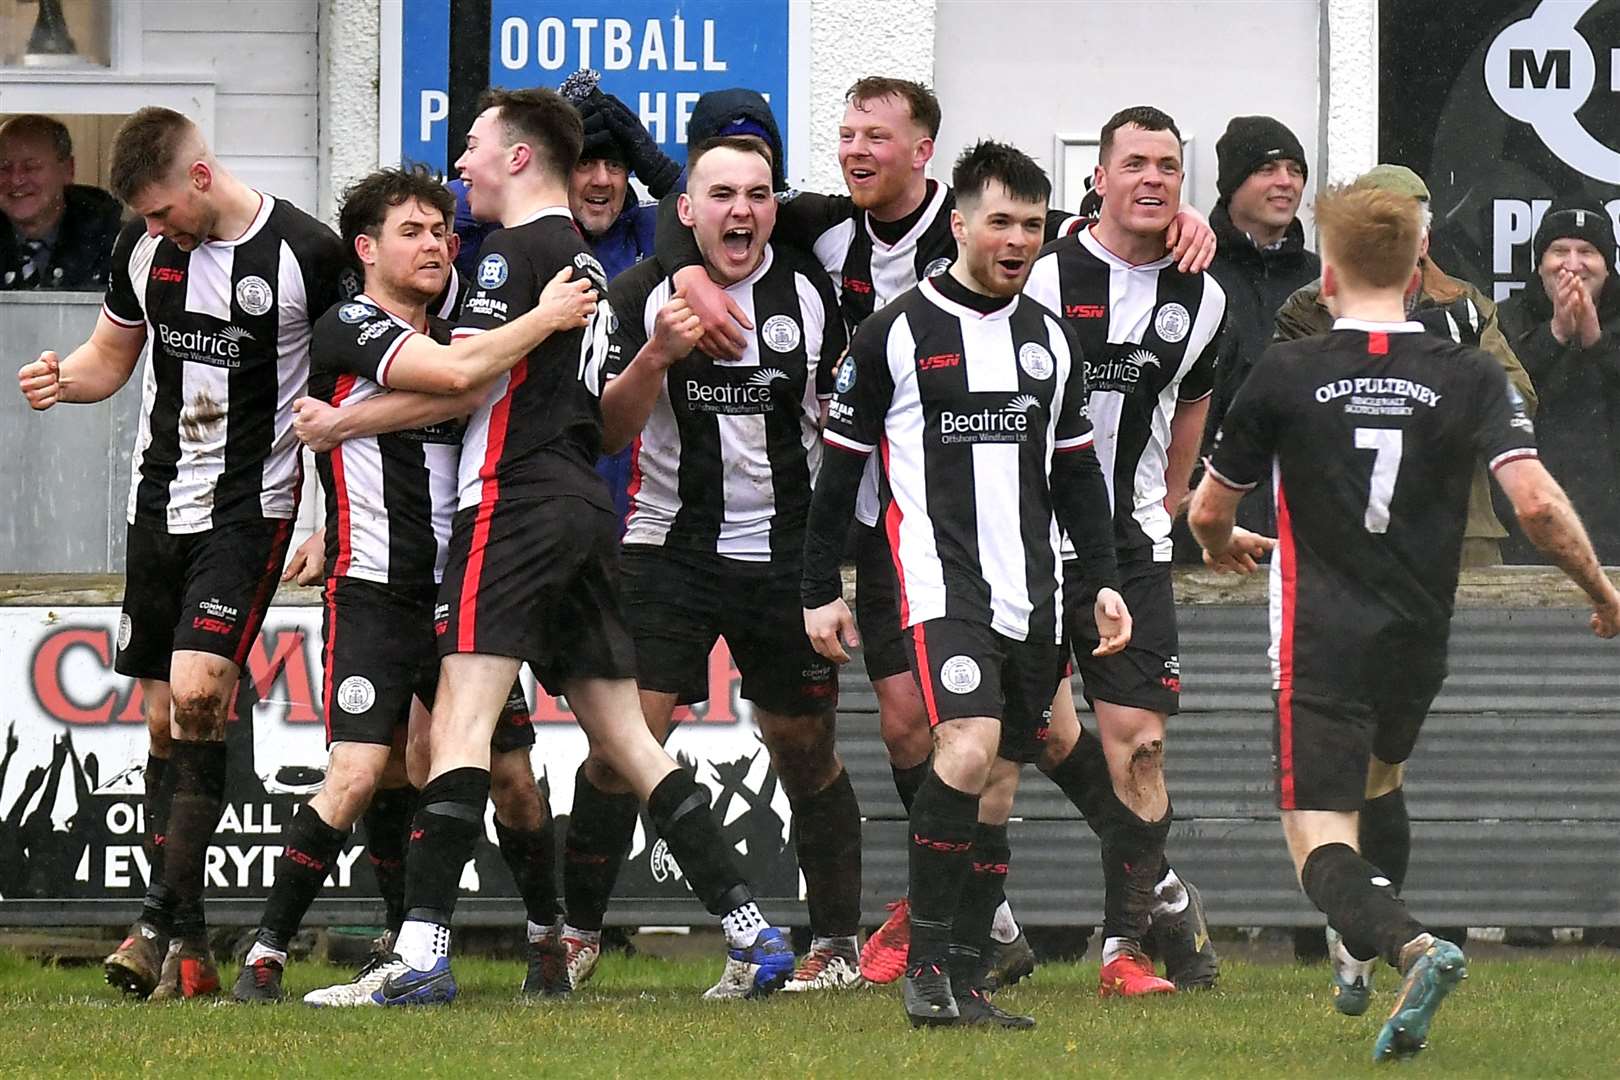 Owen Harrold (fourth player from the left) in the midst of the celebrations after Marc Macgregor scored his second goal of the afternoon against Buckie Thistle at Harmsworth Park. Picture: Mel Roger